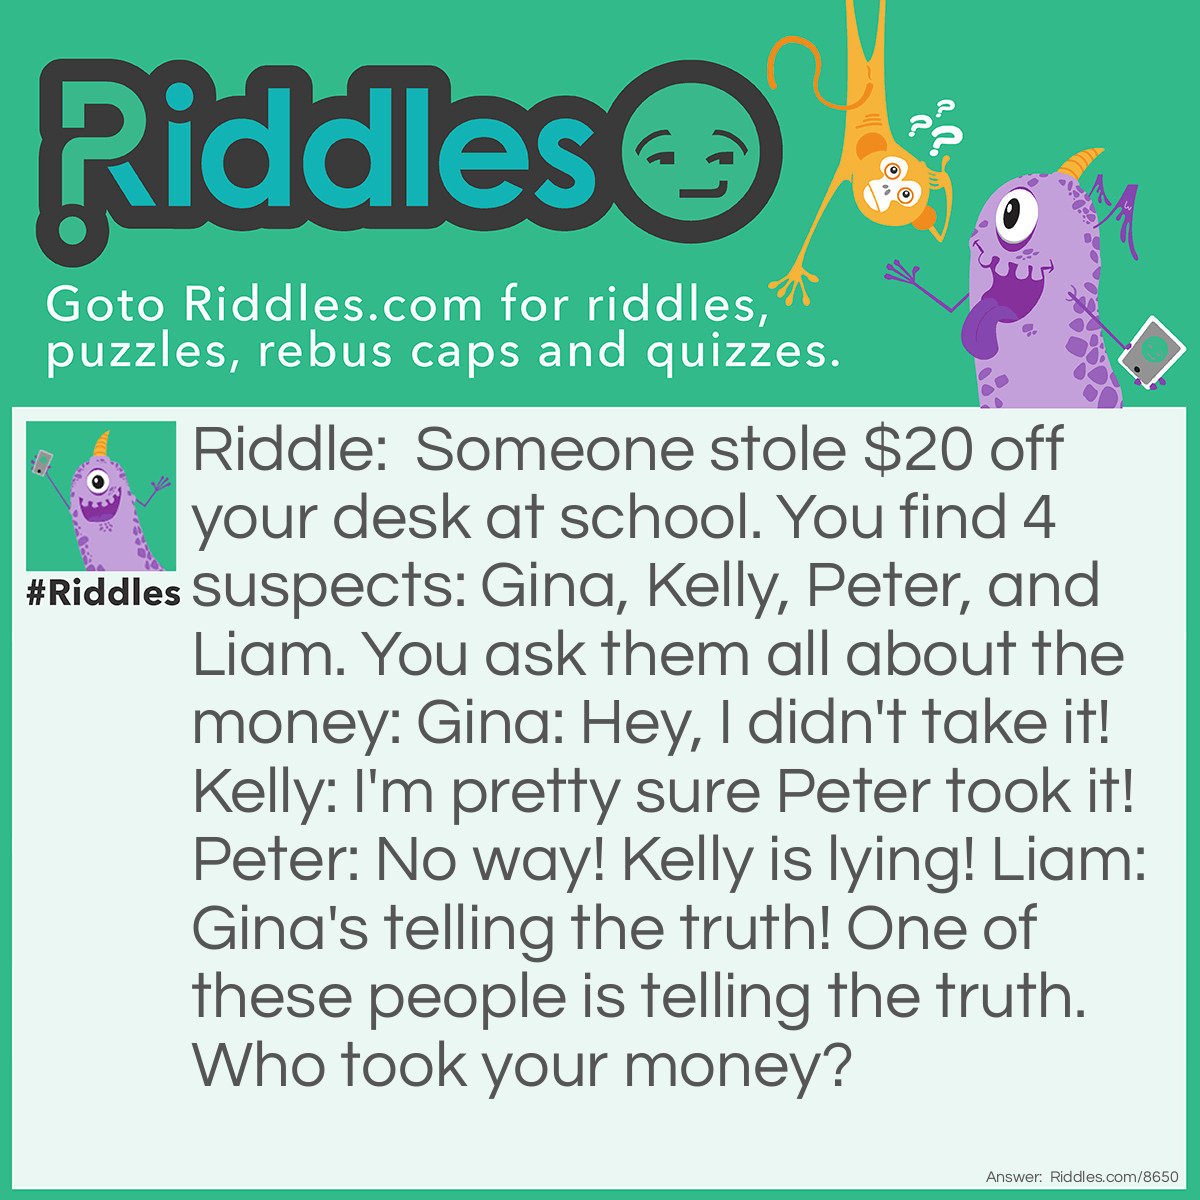 Riddle: Someone stole $20 off your desk at school. You find 4 suspects: Gina, Kelly, Peter, and Liam. You ask them all about the money: Gina: Hey, I didn't take it! Kelly: I'm pretty sure Peter took it! Peter: No way! Kelly is lying! Liam: Gina's telling the truth! One of these people is telling the truth. Who took your money? Answer: Gina took the money. She, Kelly, and Liam are lying while Peter is telling the truth. If any of the other people had taken it, then there would be only 1 liar and 3 people telling the truth.